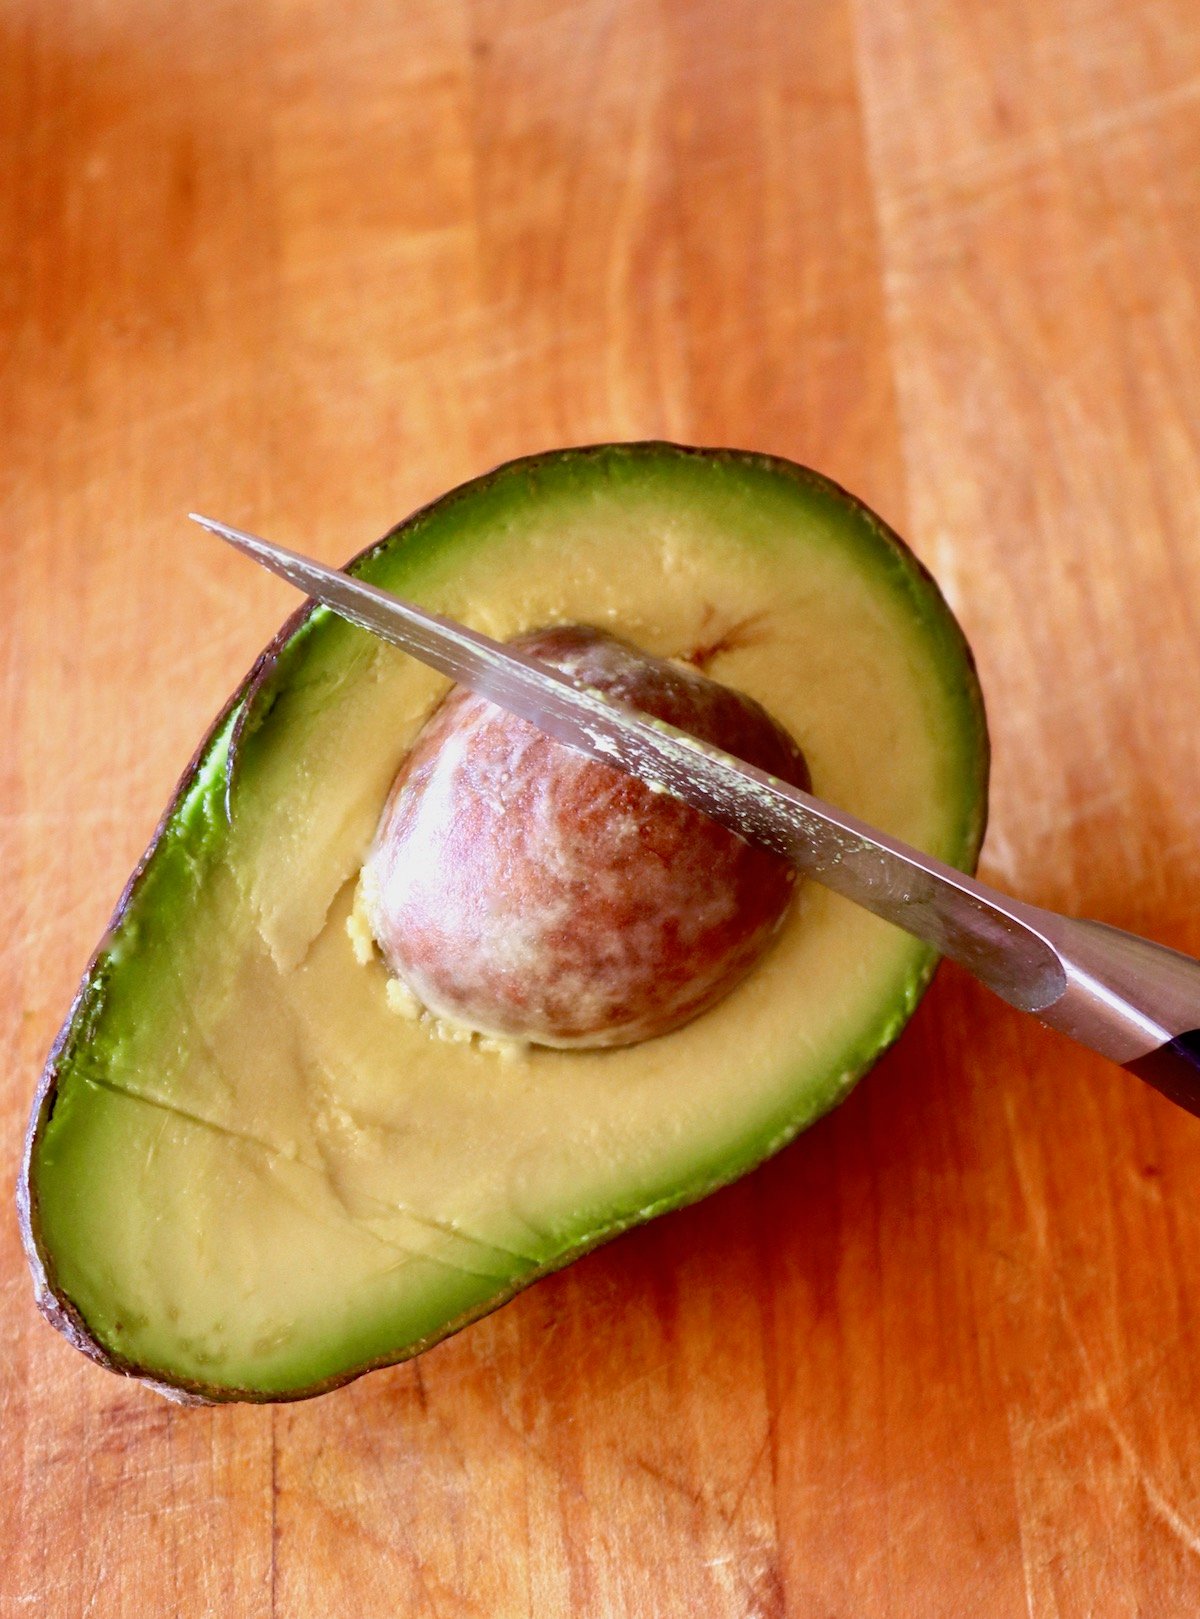 Avocado half on wood board with the pit in place with a paring knife cutting into it.